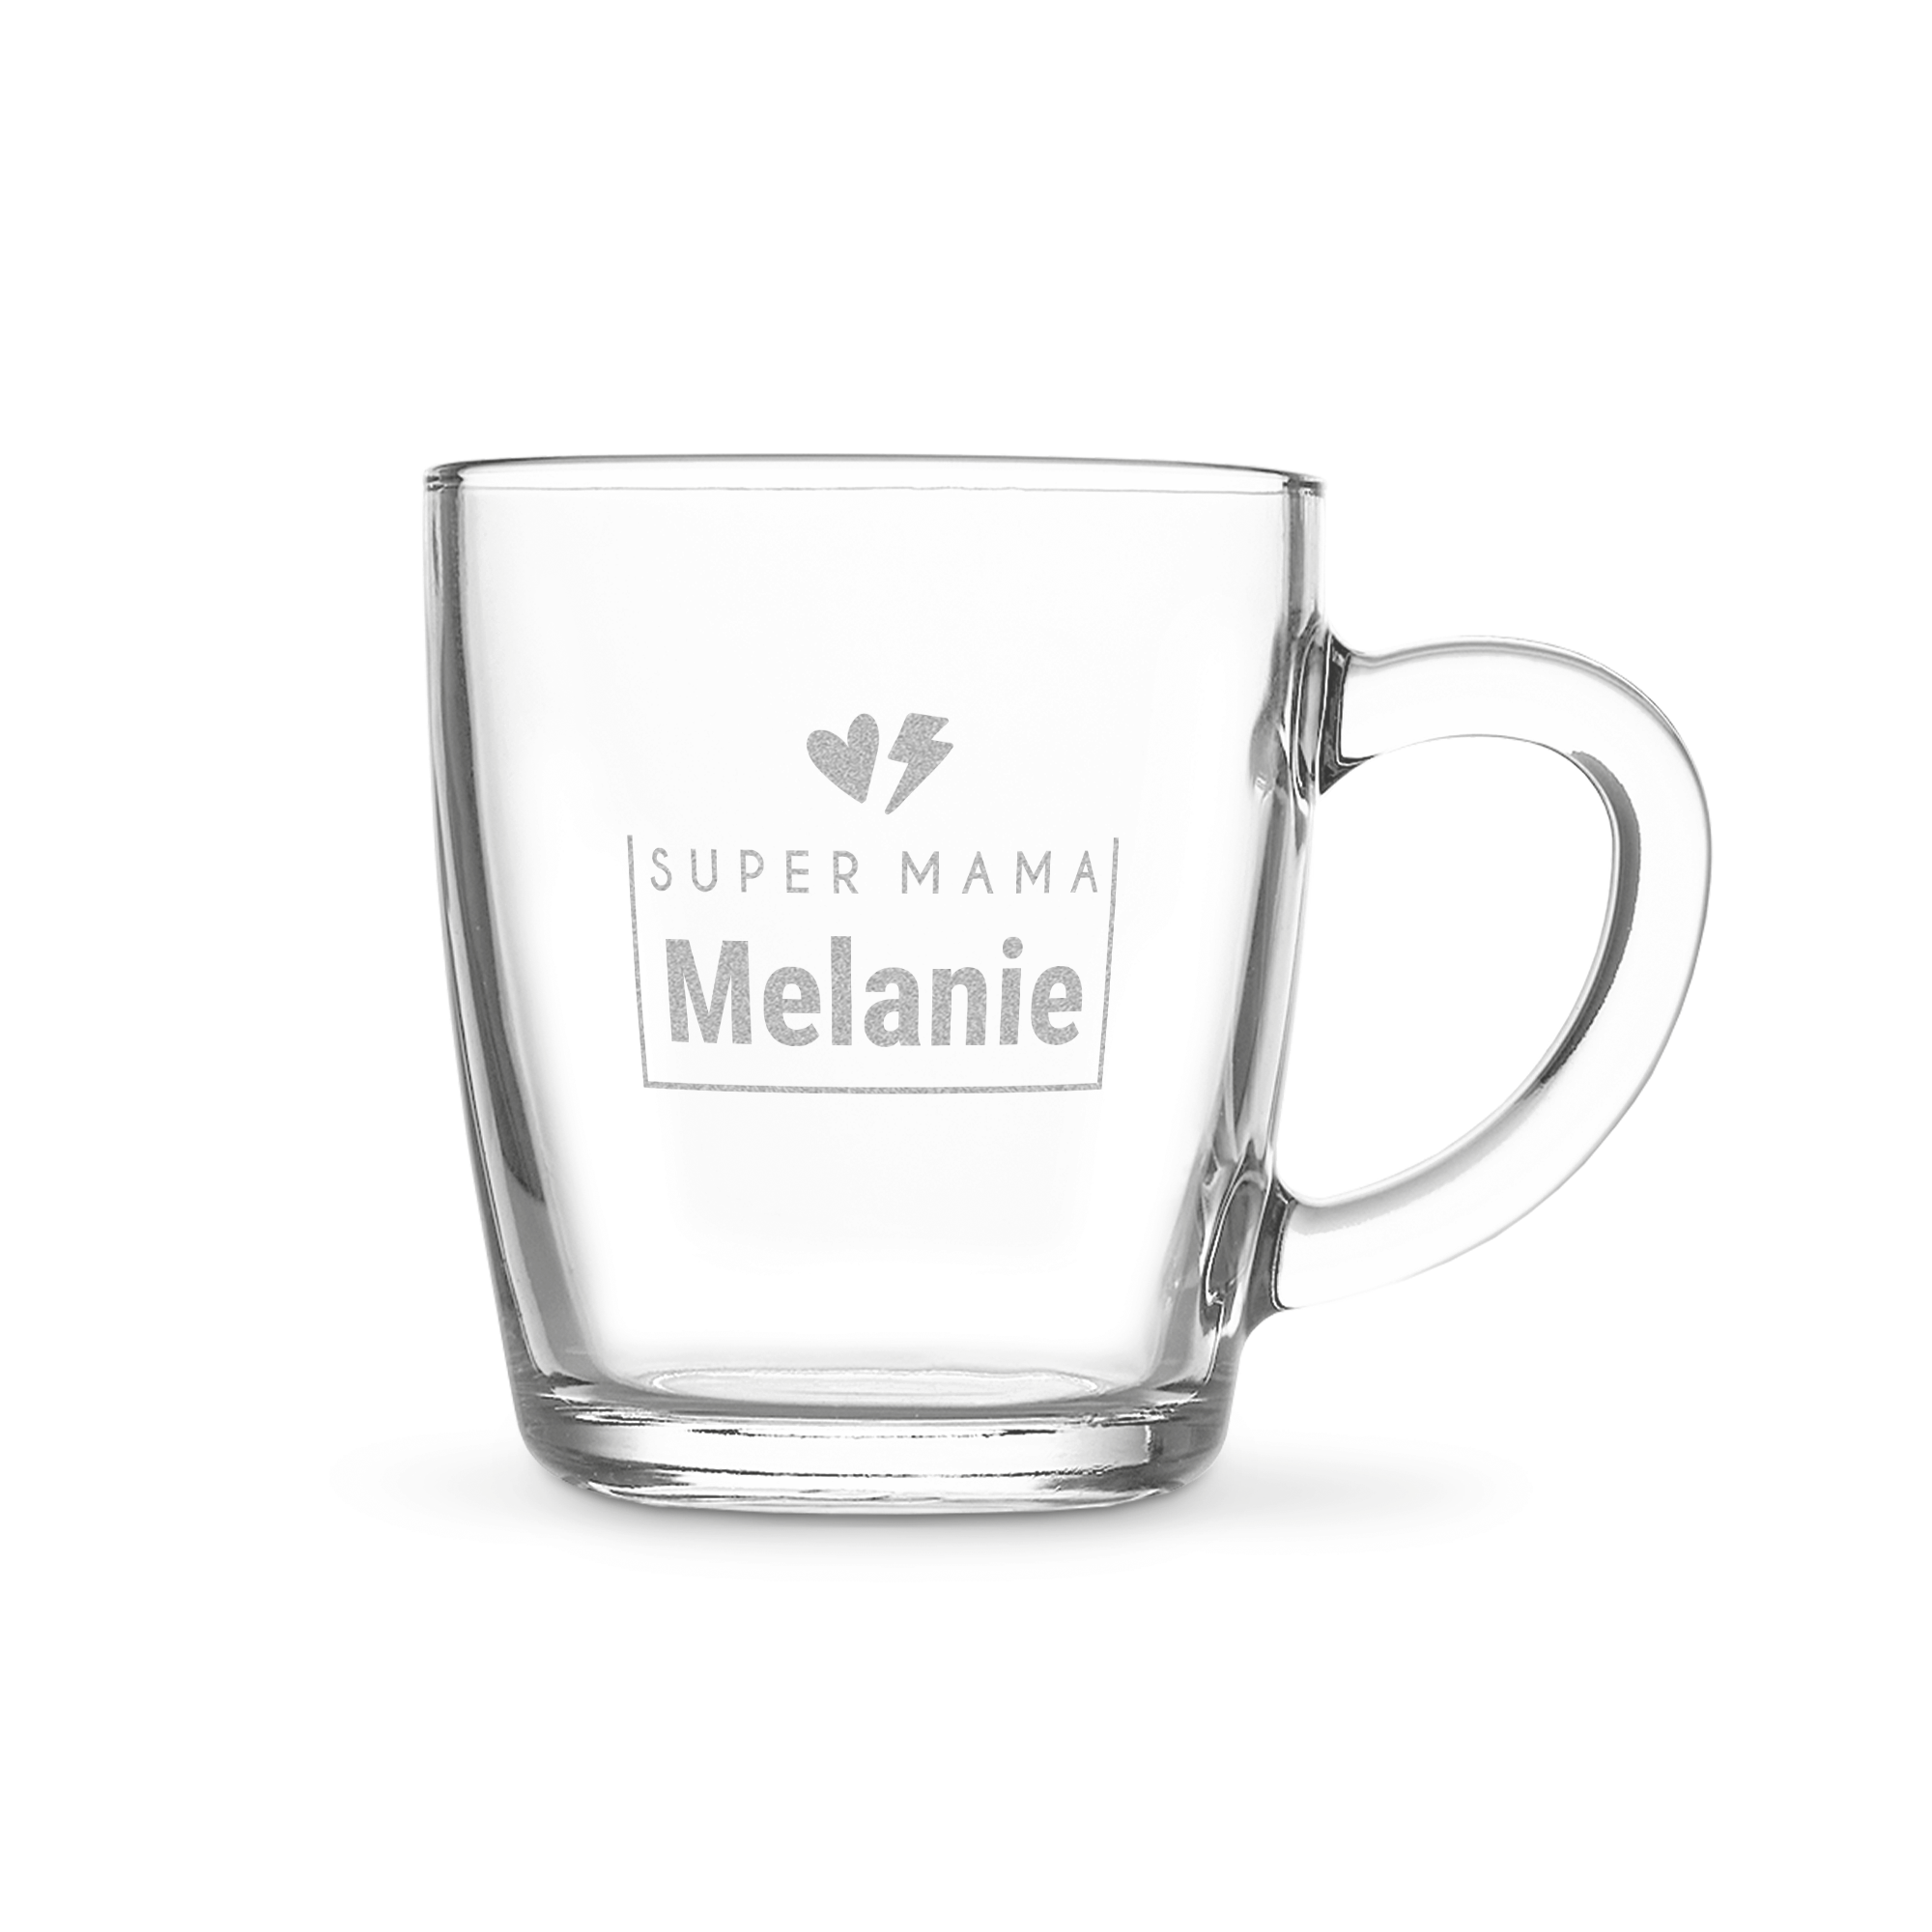 Personalised glass mug - Mother's Day - Engraved